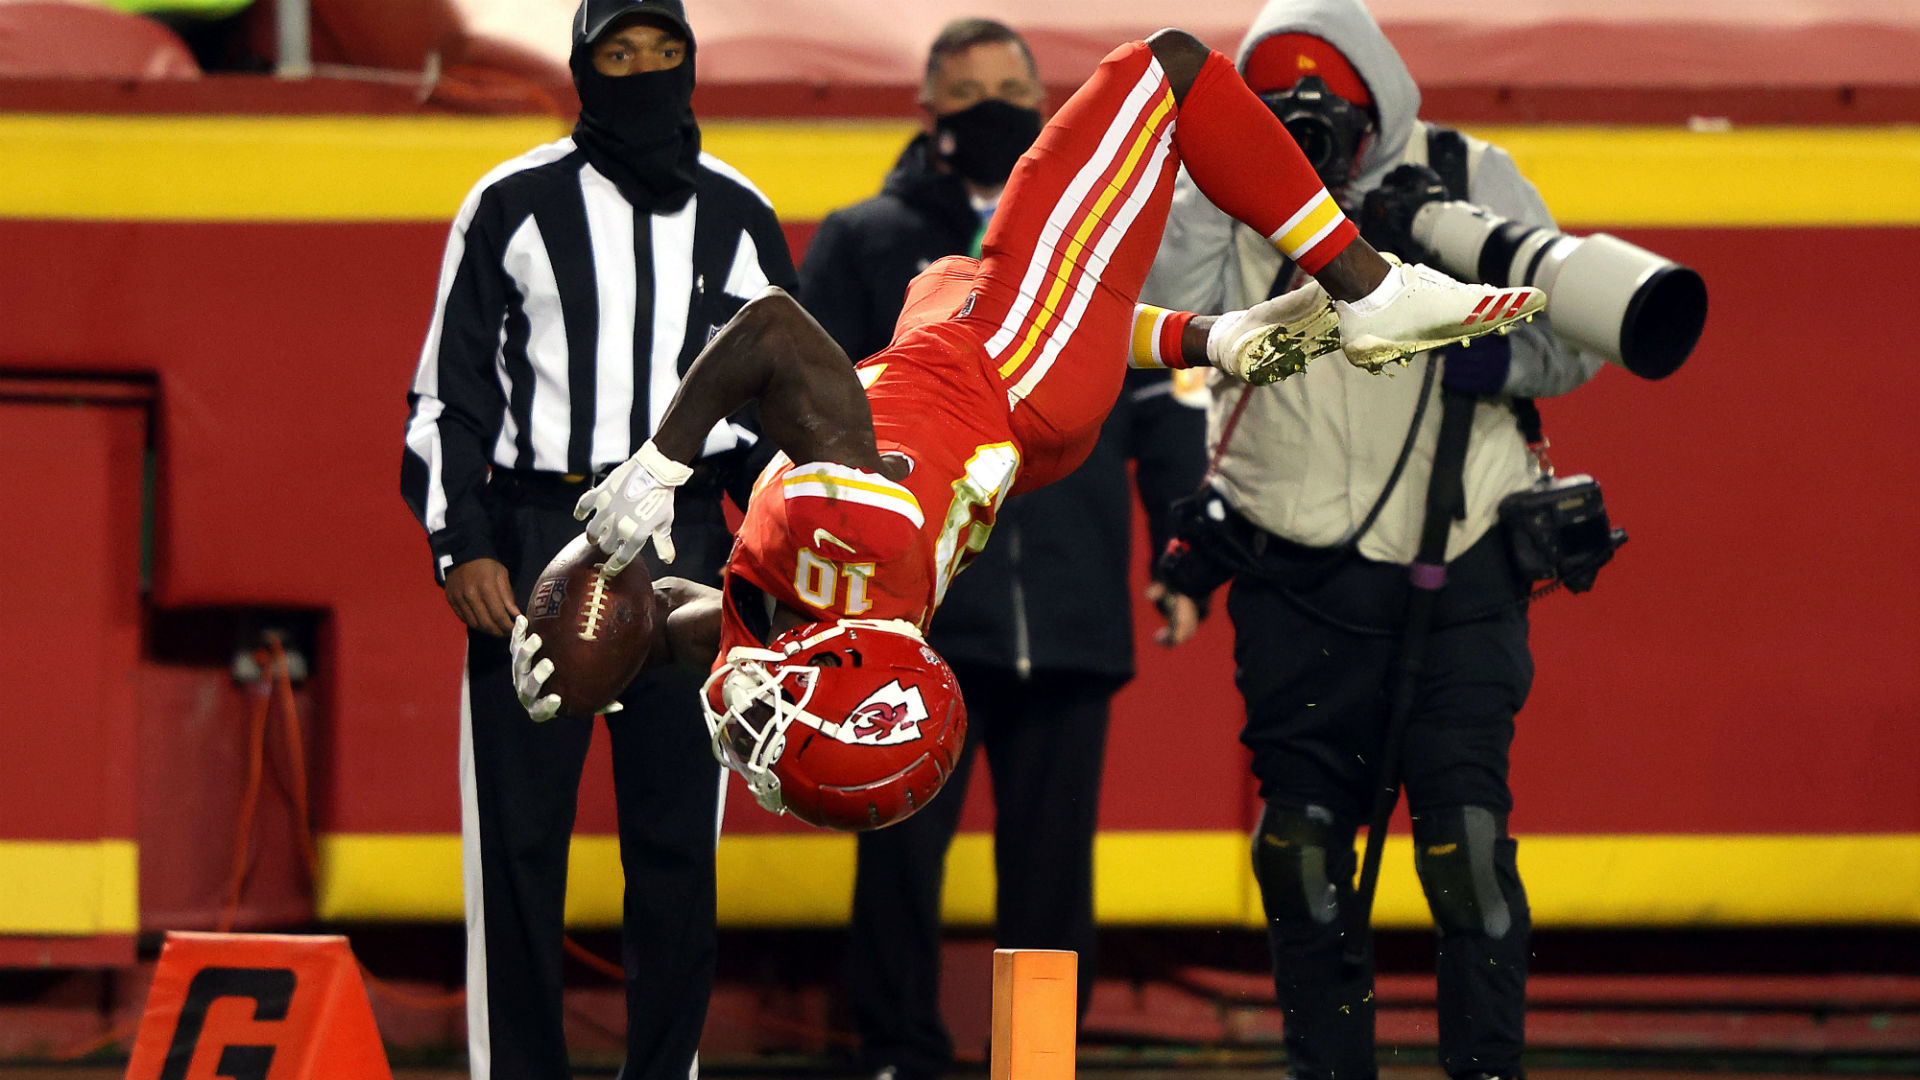 Tyreek Hill's latest backflip touchdown was negated because of penalty vs. Broncos | Sporting News